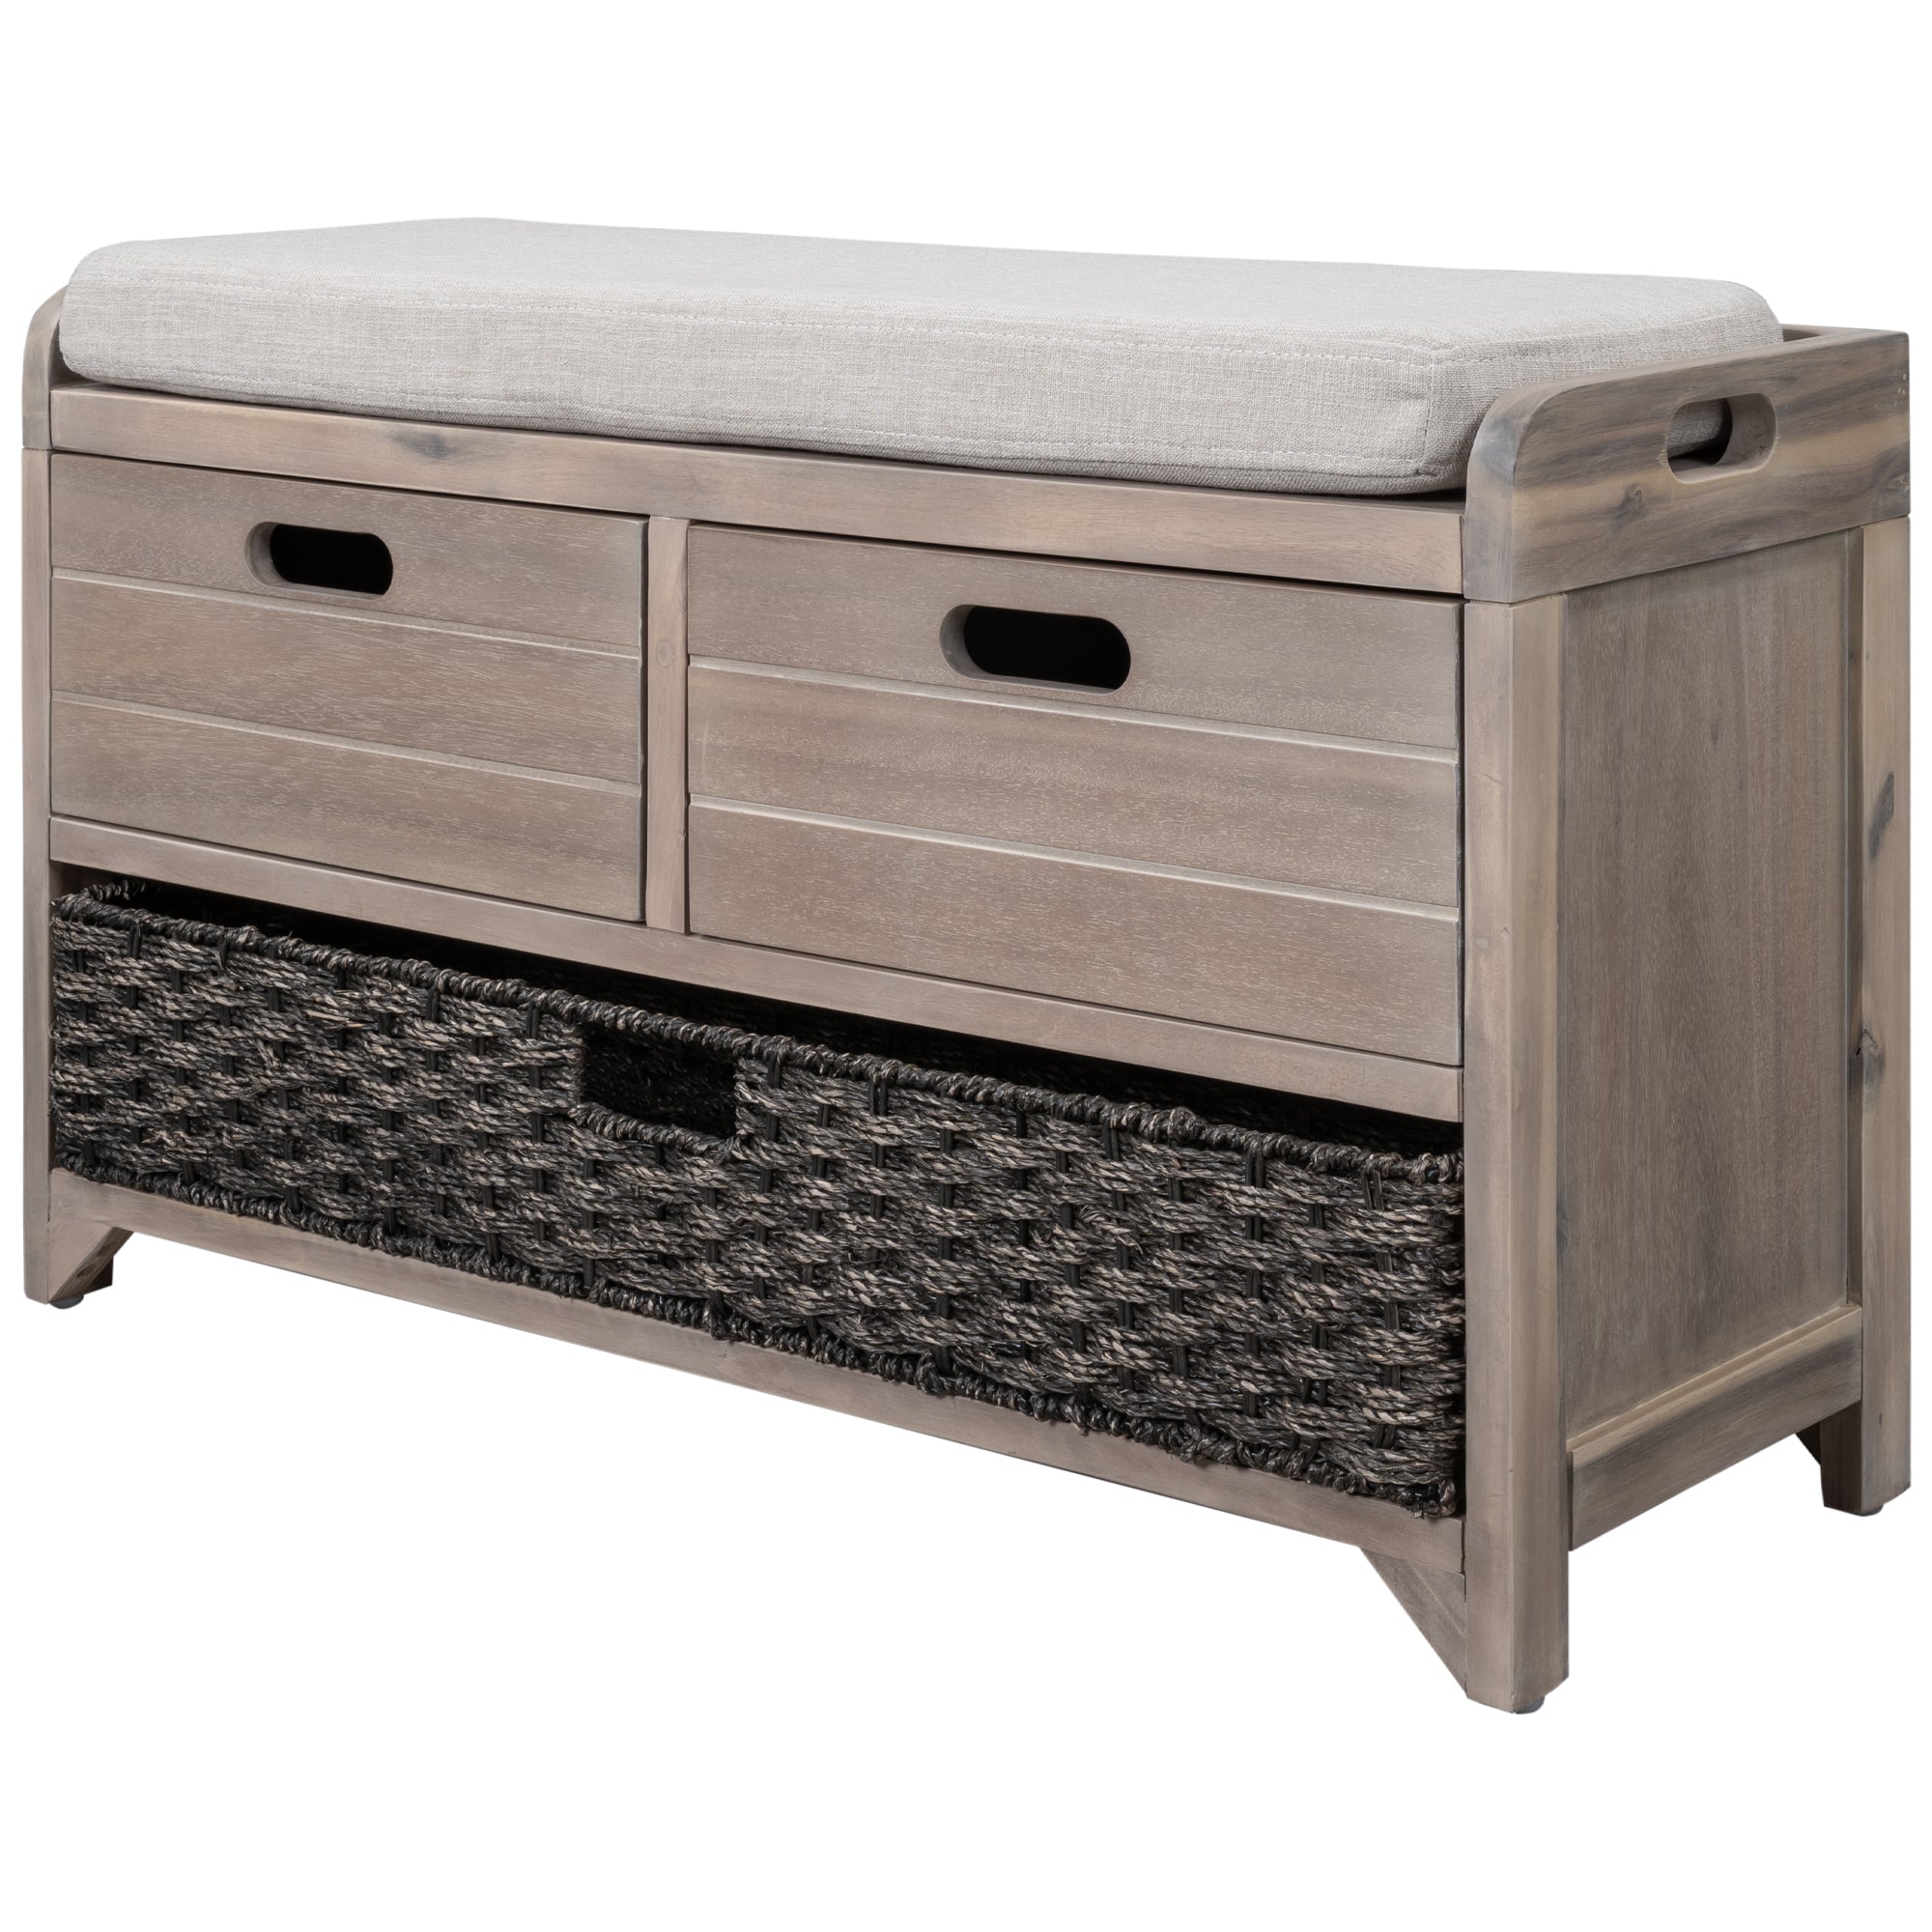 Storage Bench with Removable Basket and 2 Drawers